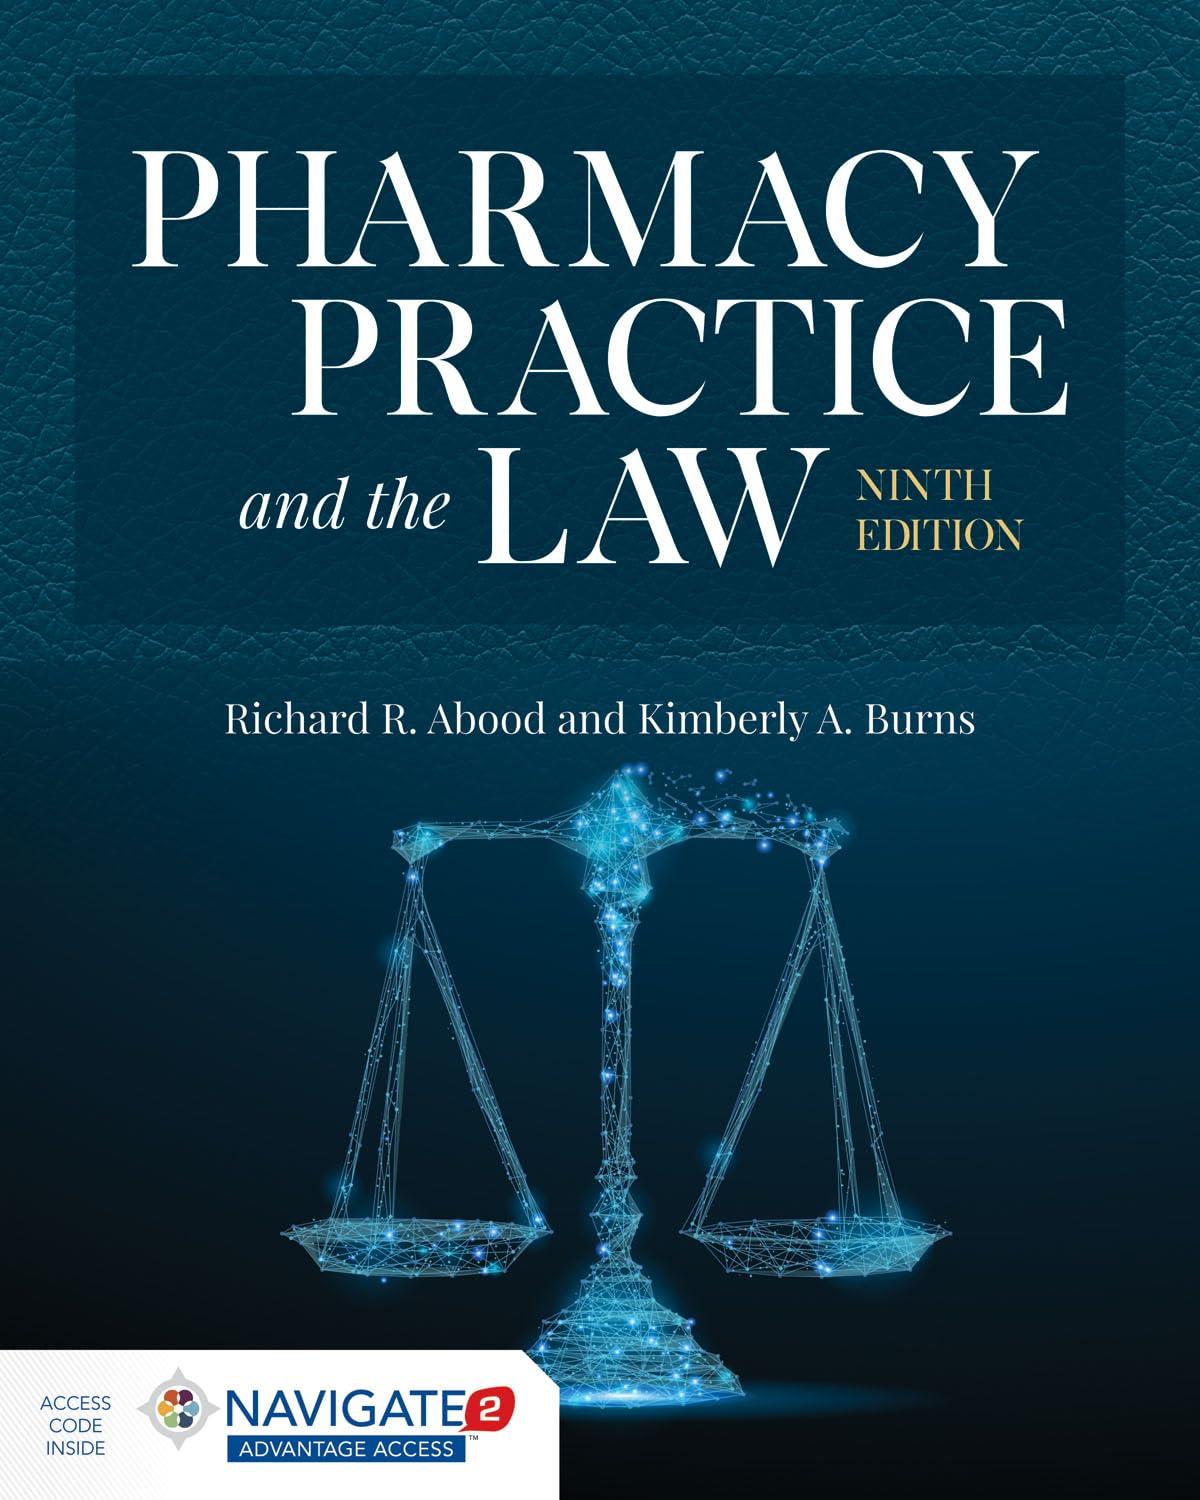 pharmacy practice and the law 9th edition richard r. abood, kimberly a. burns 1284154971, 978-1284154979